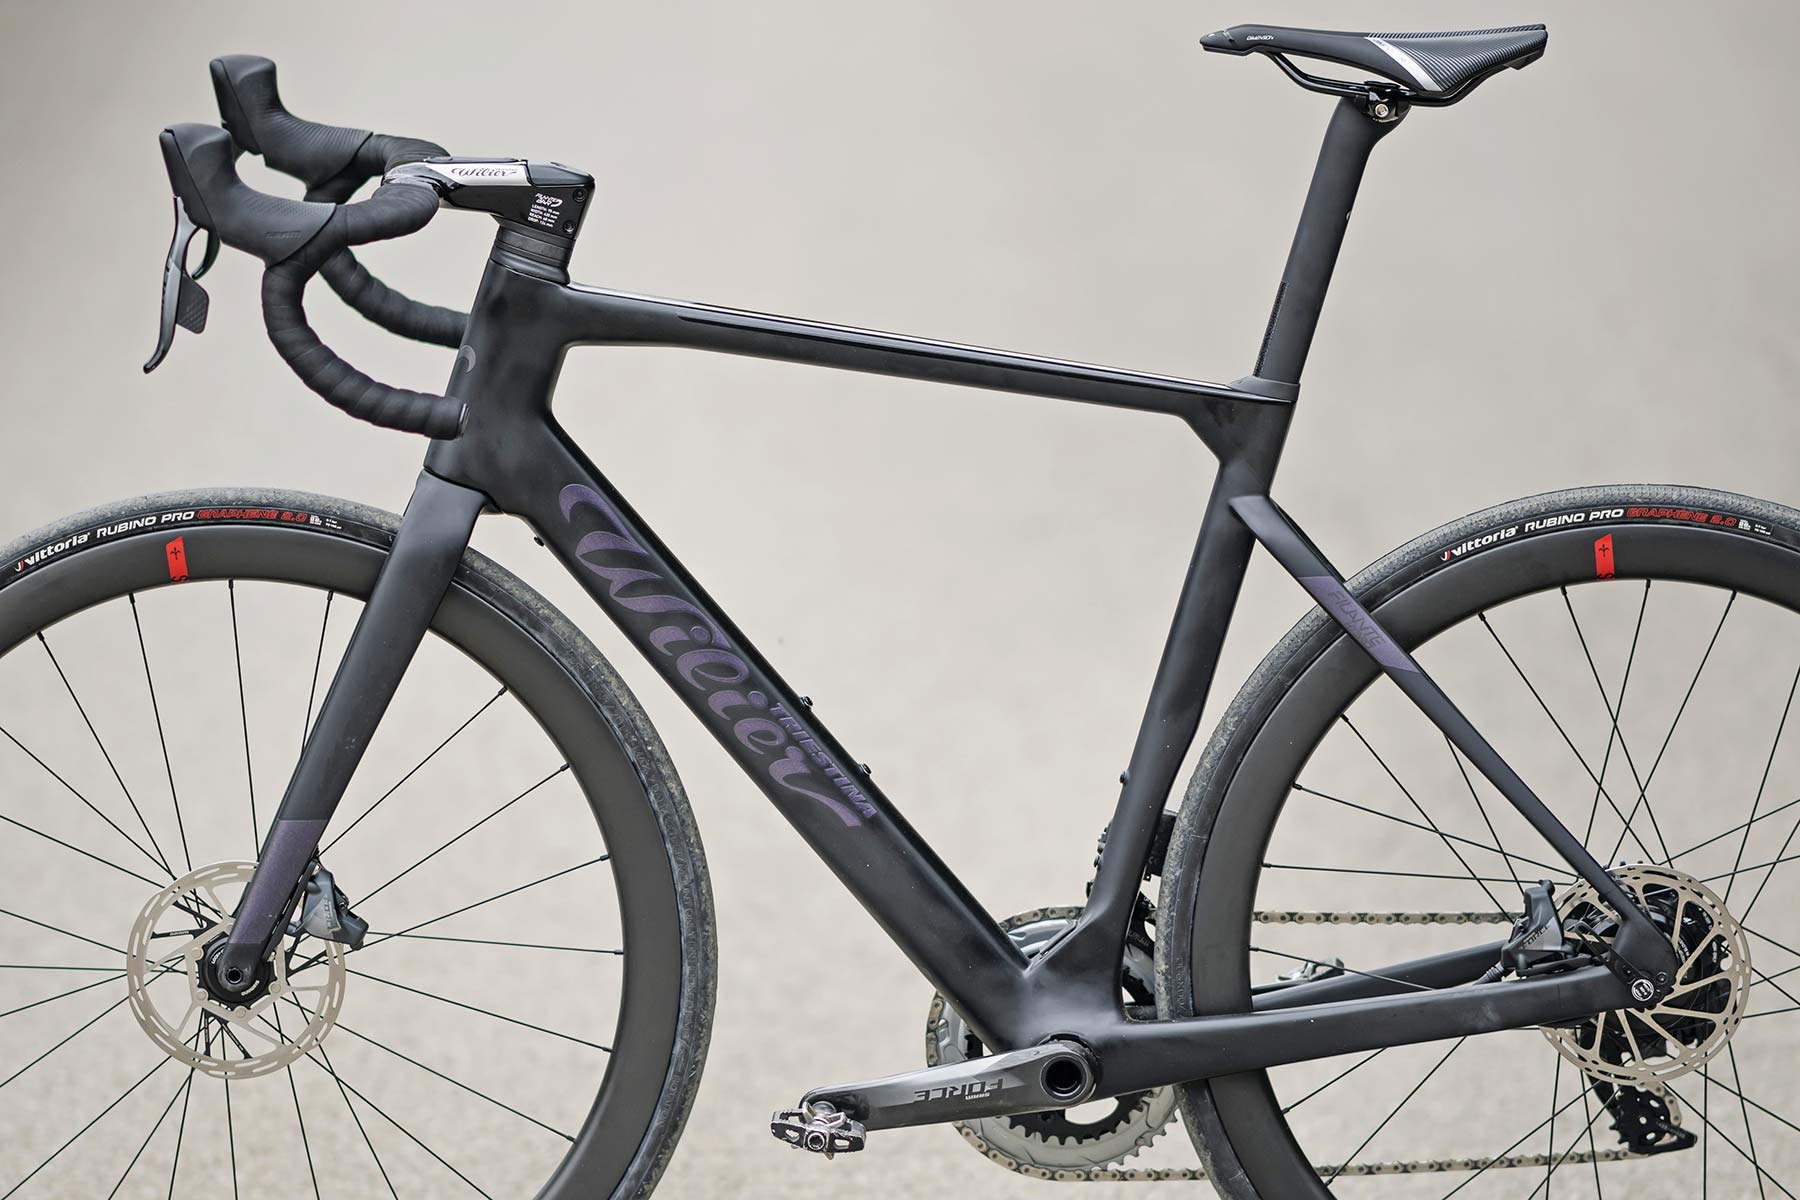 2022 Wilier Filante Hybrid stealthy carbon aero road e-bike, Road Bike Connection Spring, photo by Rupert Fowler, frame detail